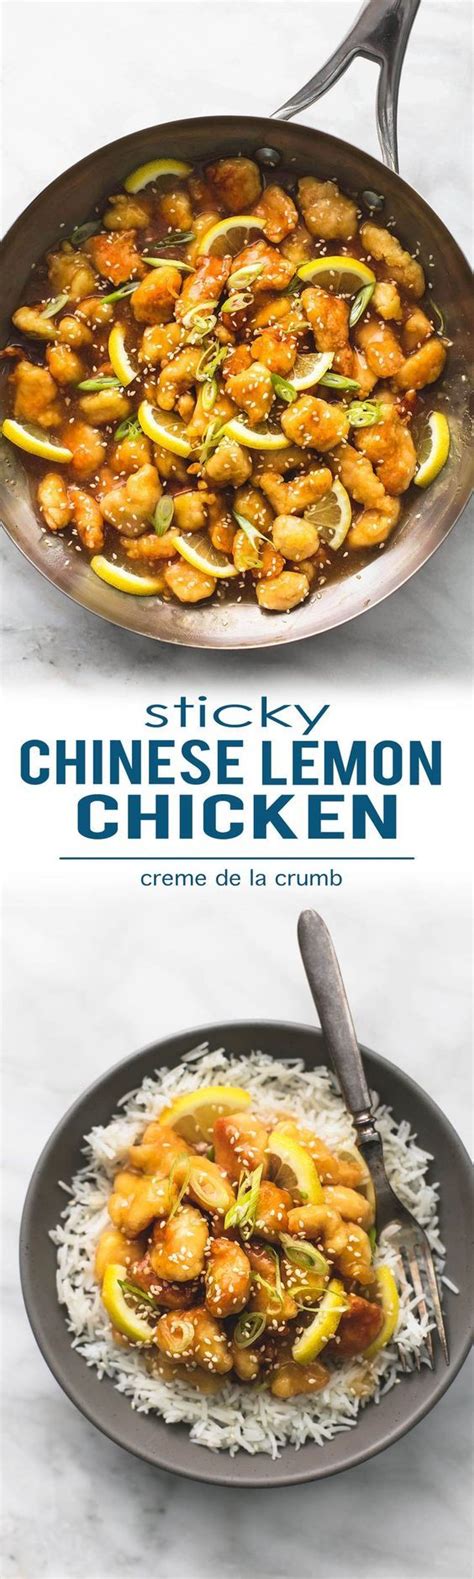 Garlic noodles are sweet, rich, and savory with a strong garlic punch. Easy healthy Sticky Chinese Lemon Chicken with a sticky ...